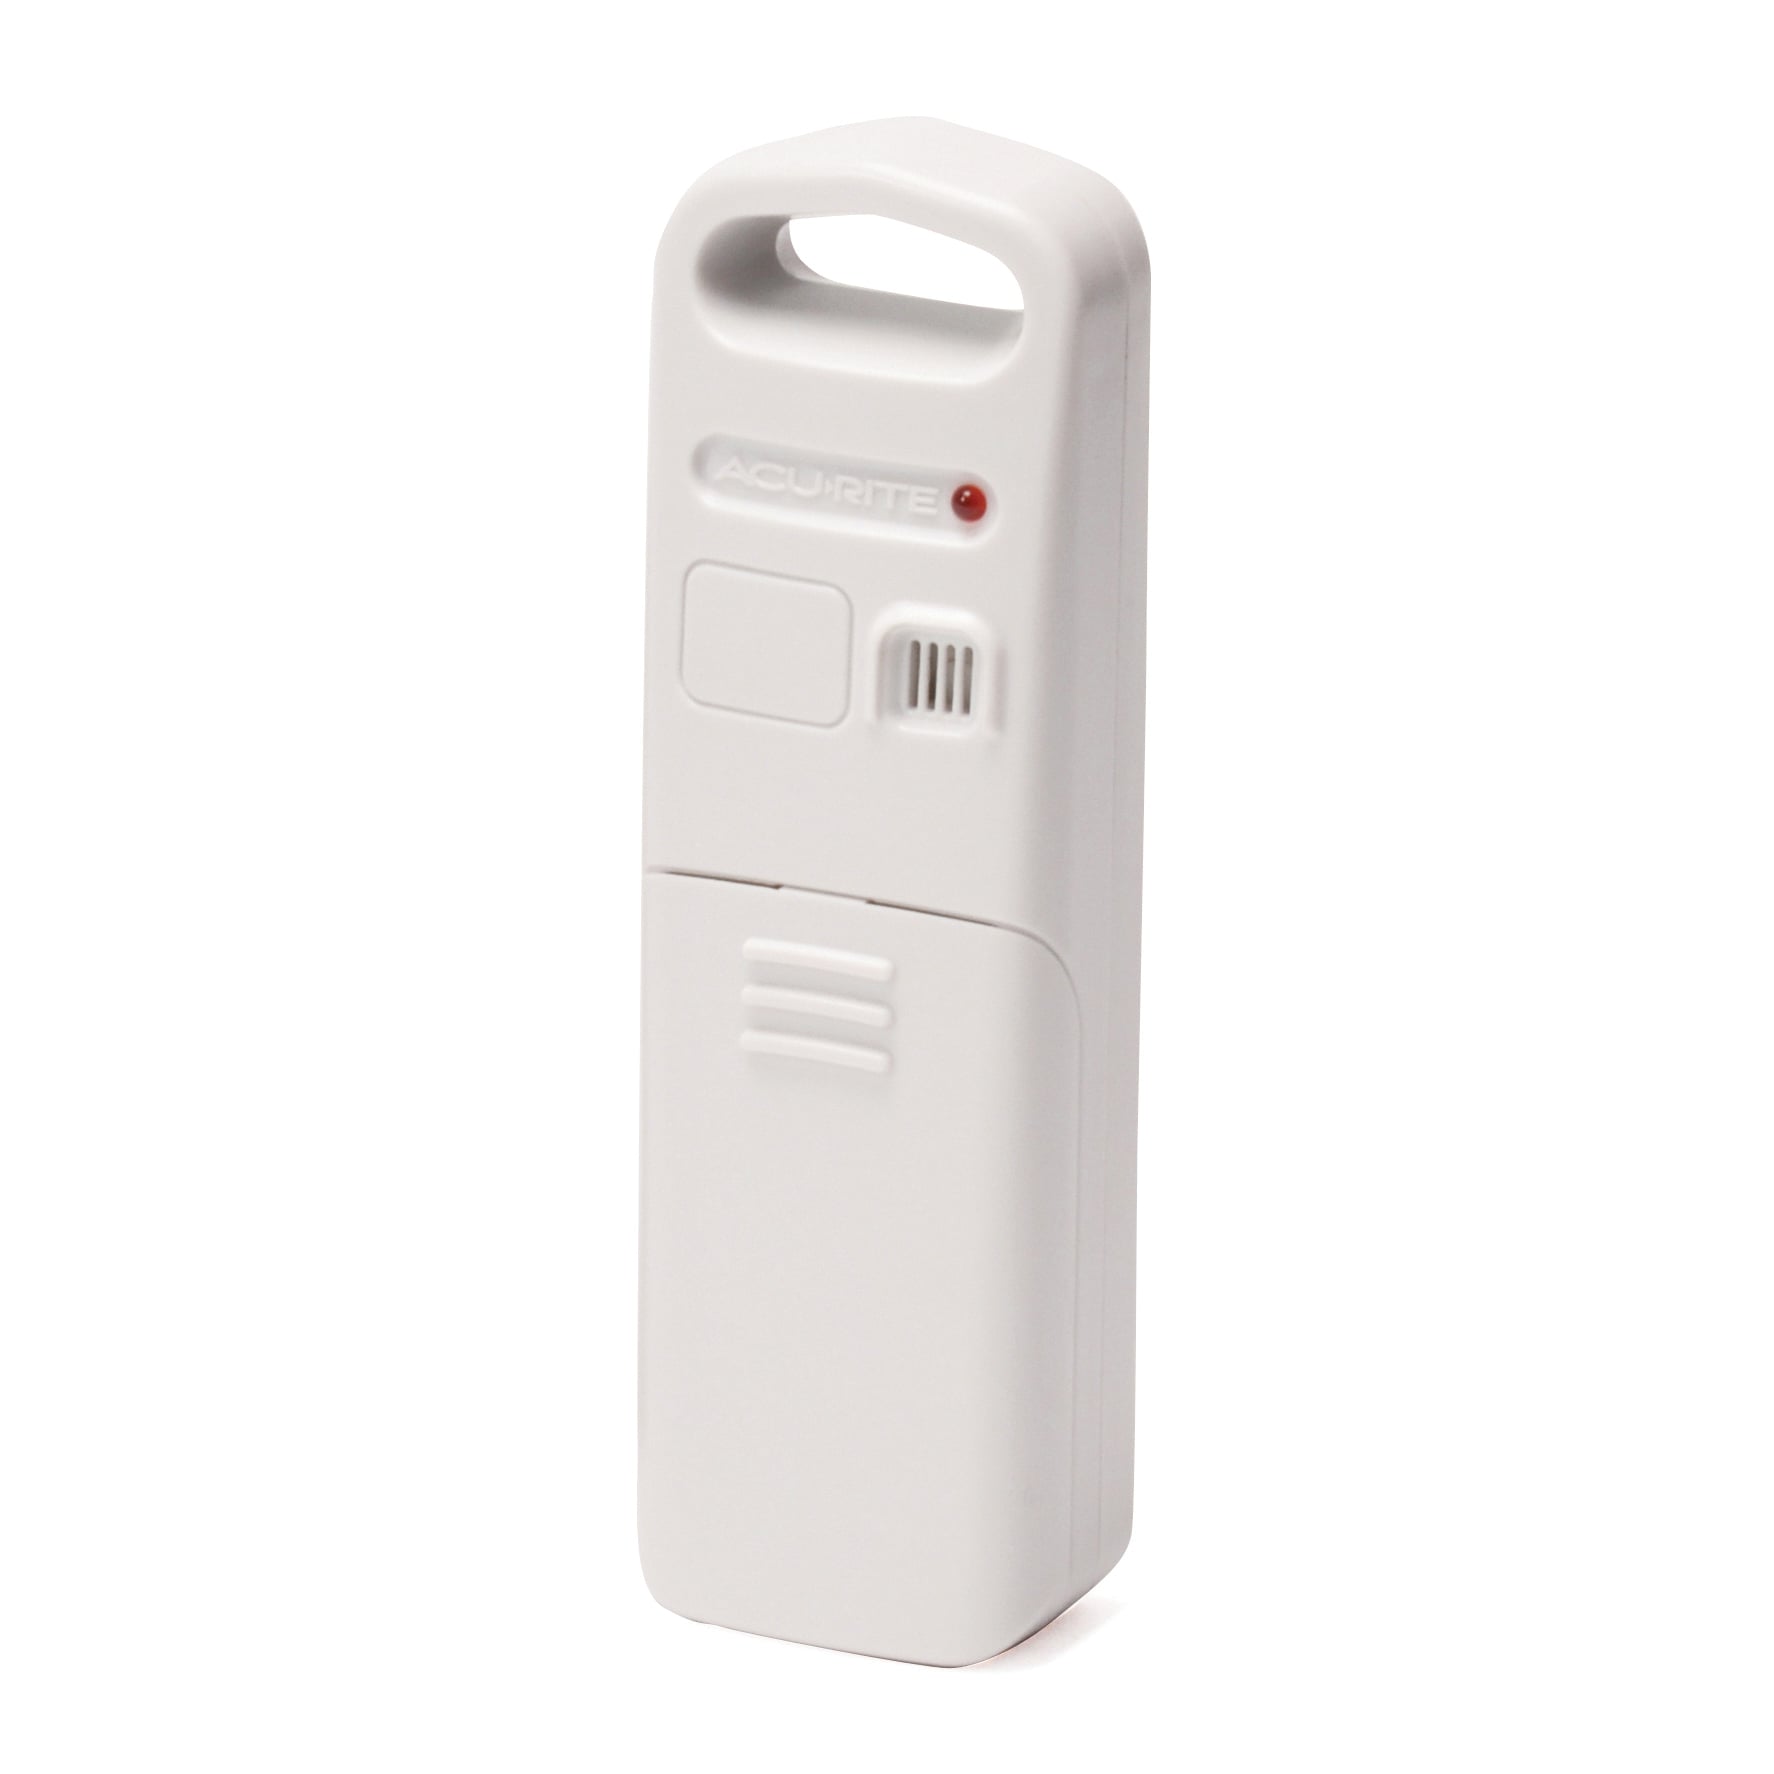  AcuRite Wireless Indoor Outdoor Temperature and Humidity Sensor  (06002M) , white : Everything Else